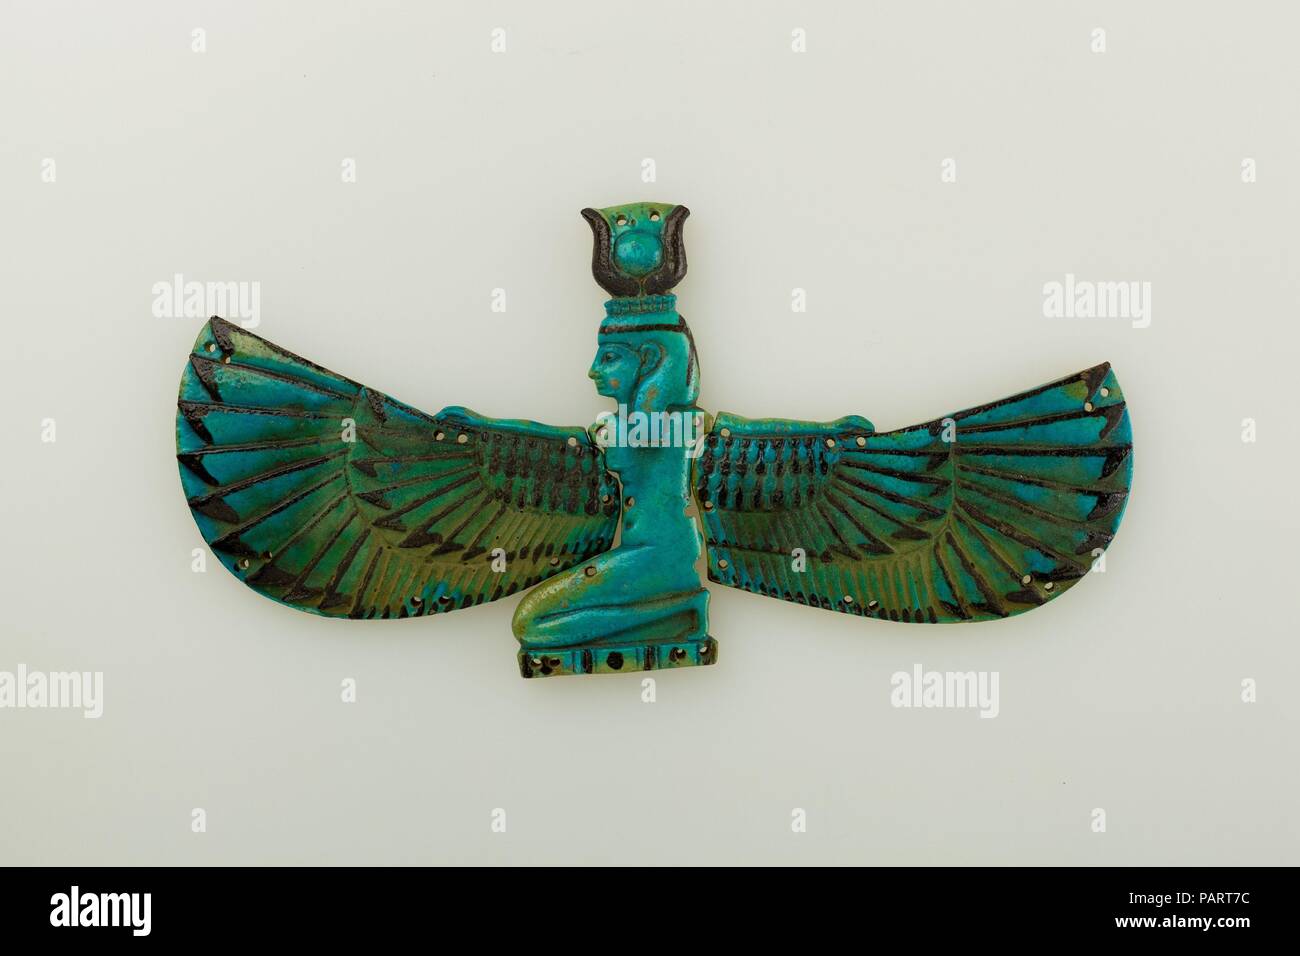 Winged Nut. Dimensions: H. 11.5 x W. 23.6 cm (4 1/2 x 9 5/16 in.). Dynasty: Dynasty 21-25. Date: ca. 1070-664 B.C..  The goddess of the sky, Nut, is represented here with her protective outspread wings. On her head are cows' horns and the sundisk, which are elements that could be worn by various goddesses. The small holes were made for sewing the pieces onto a mummy's wrappings, but such elements could also be incorporated into beaded nets, which were placed on top of a mummy's wrappings. Museum: Metropolitan Museum of Art, New York, USA. Stock Photo